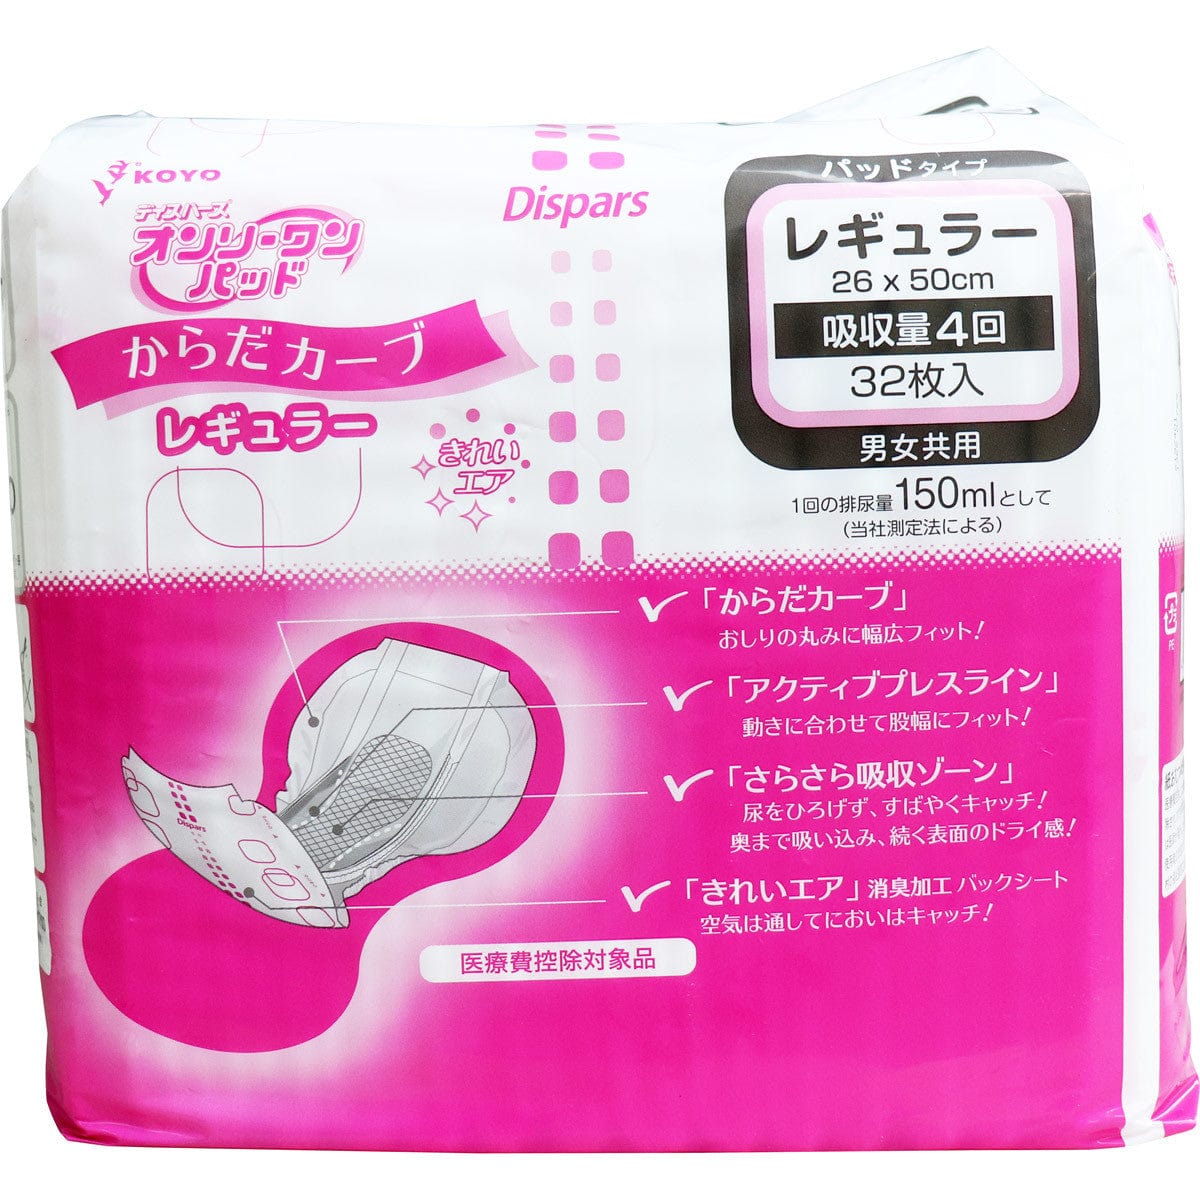 Koyo - Dispars Only One Pad Body Curve Urine Leakage Unisex Adult Diapers  Regular 4961392320779 Adult Diapers